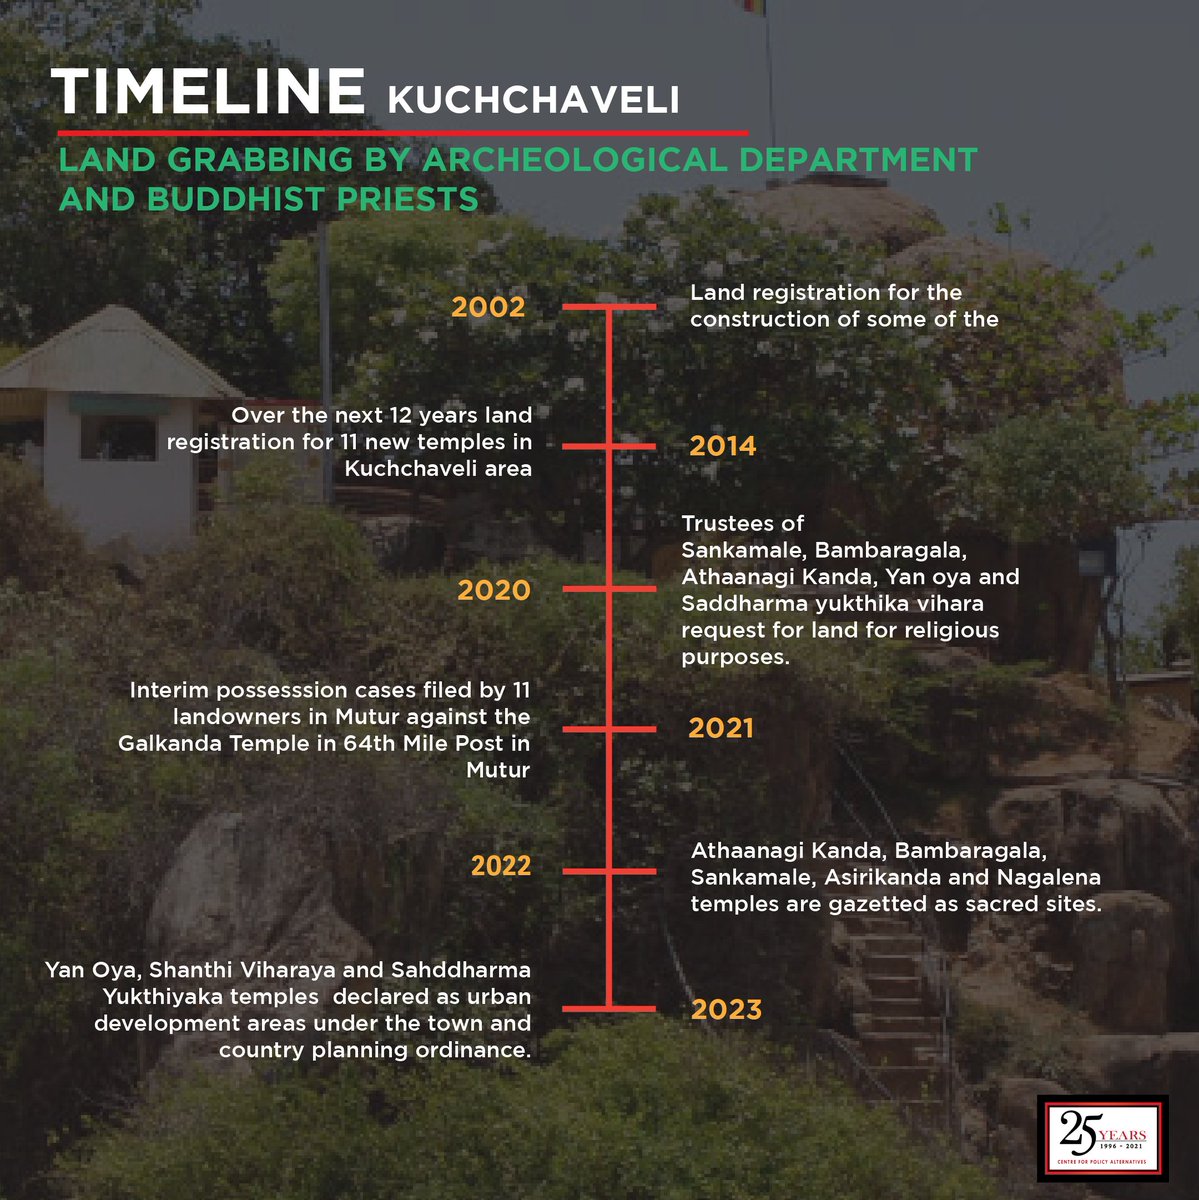 The timeline reveals the evolving complexities in Kuchchaveli, Trincomalee, as 32 Buddhist temples are being built in a community predominantly consisting of Muslims and Tamils.